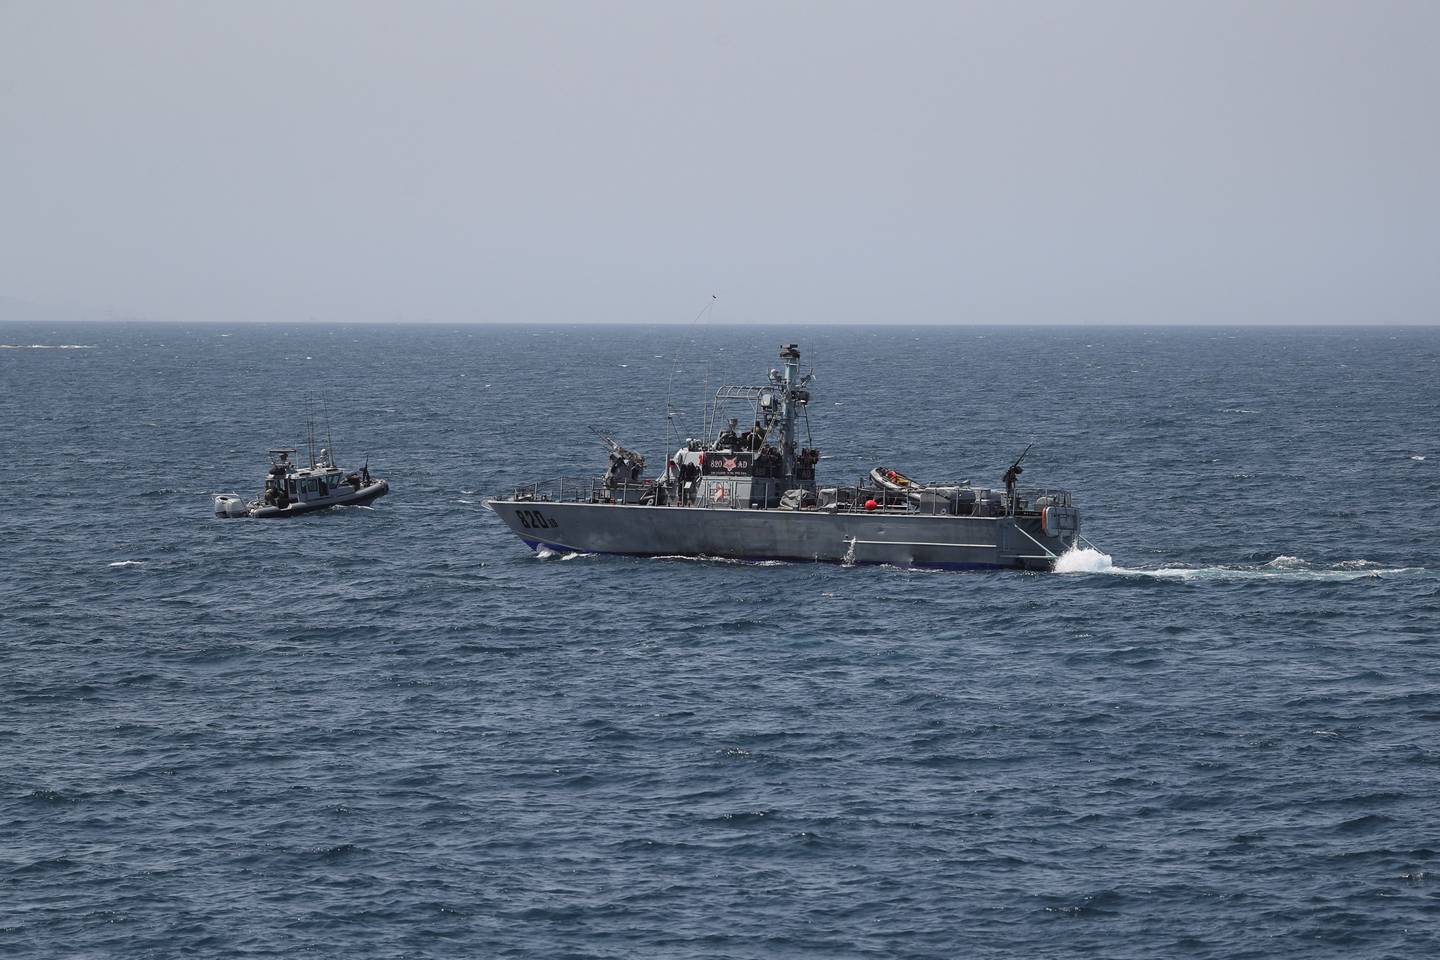 Israeli navy boats are seen in the Mediterranean Sea as seen from Rosh Hanikra, close to the Lebanese border, northern Israel. Reuters